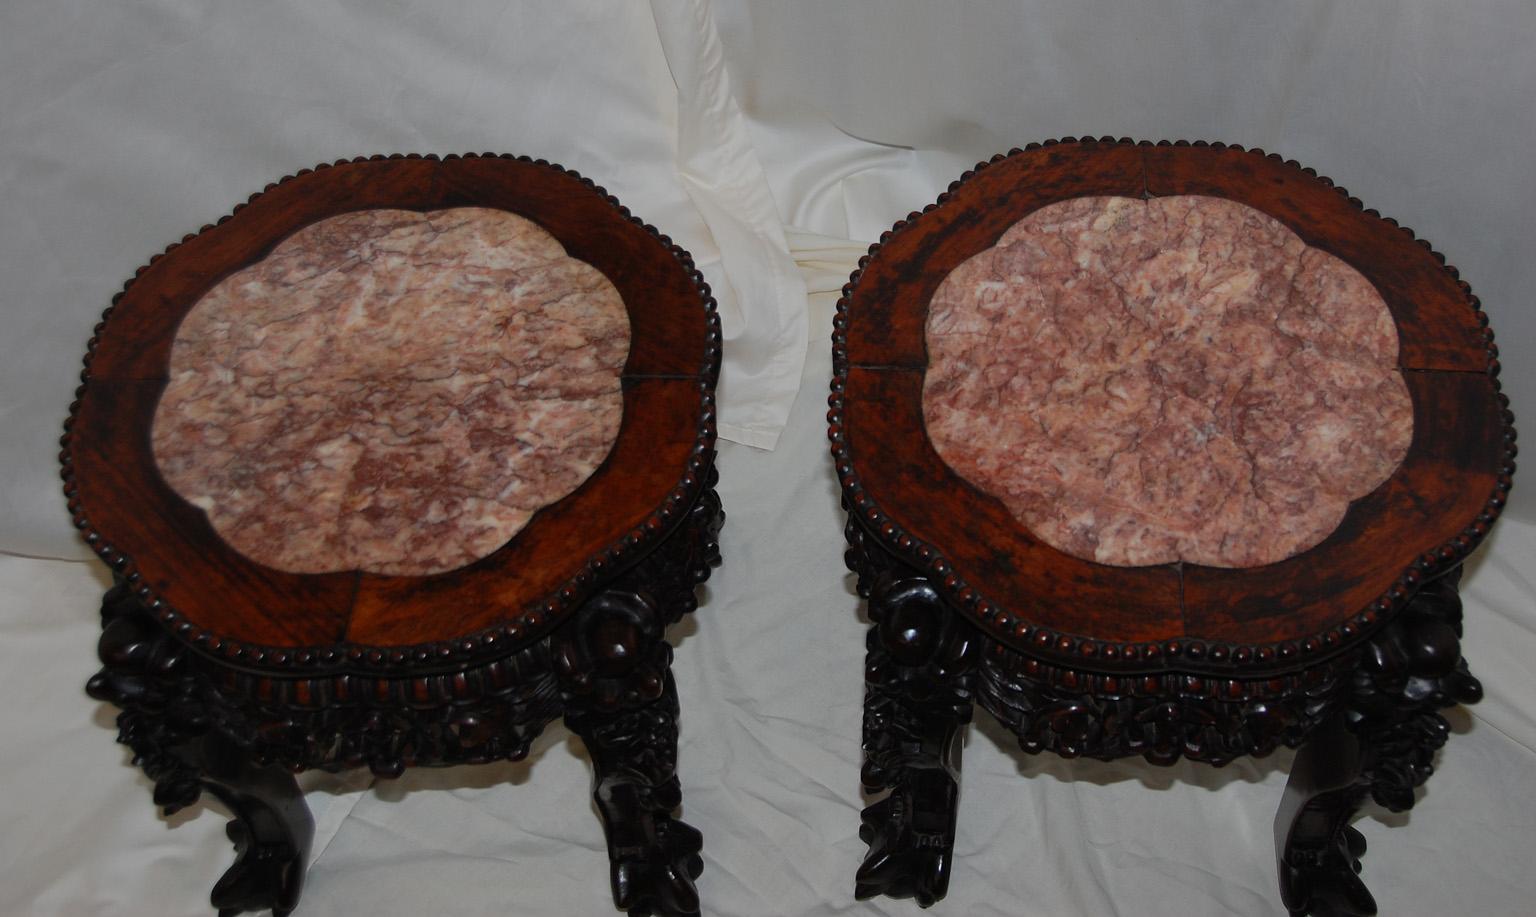 Chinese Qing period pair of rosewood hand carved stools with rose marble lobed inlay to the top of each stool. These quite substantial stools make wonderful side tables next to a chair, or as an extra place to sit, or as a handsome plant or